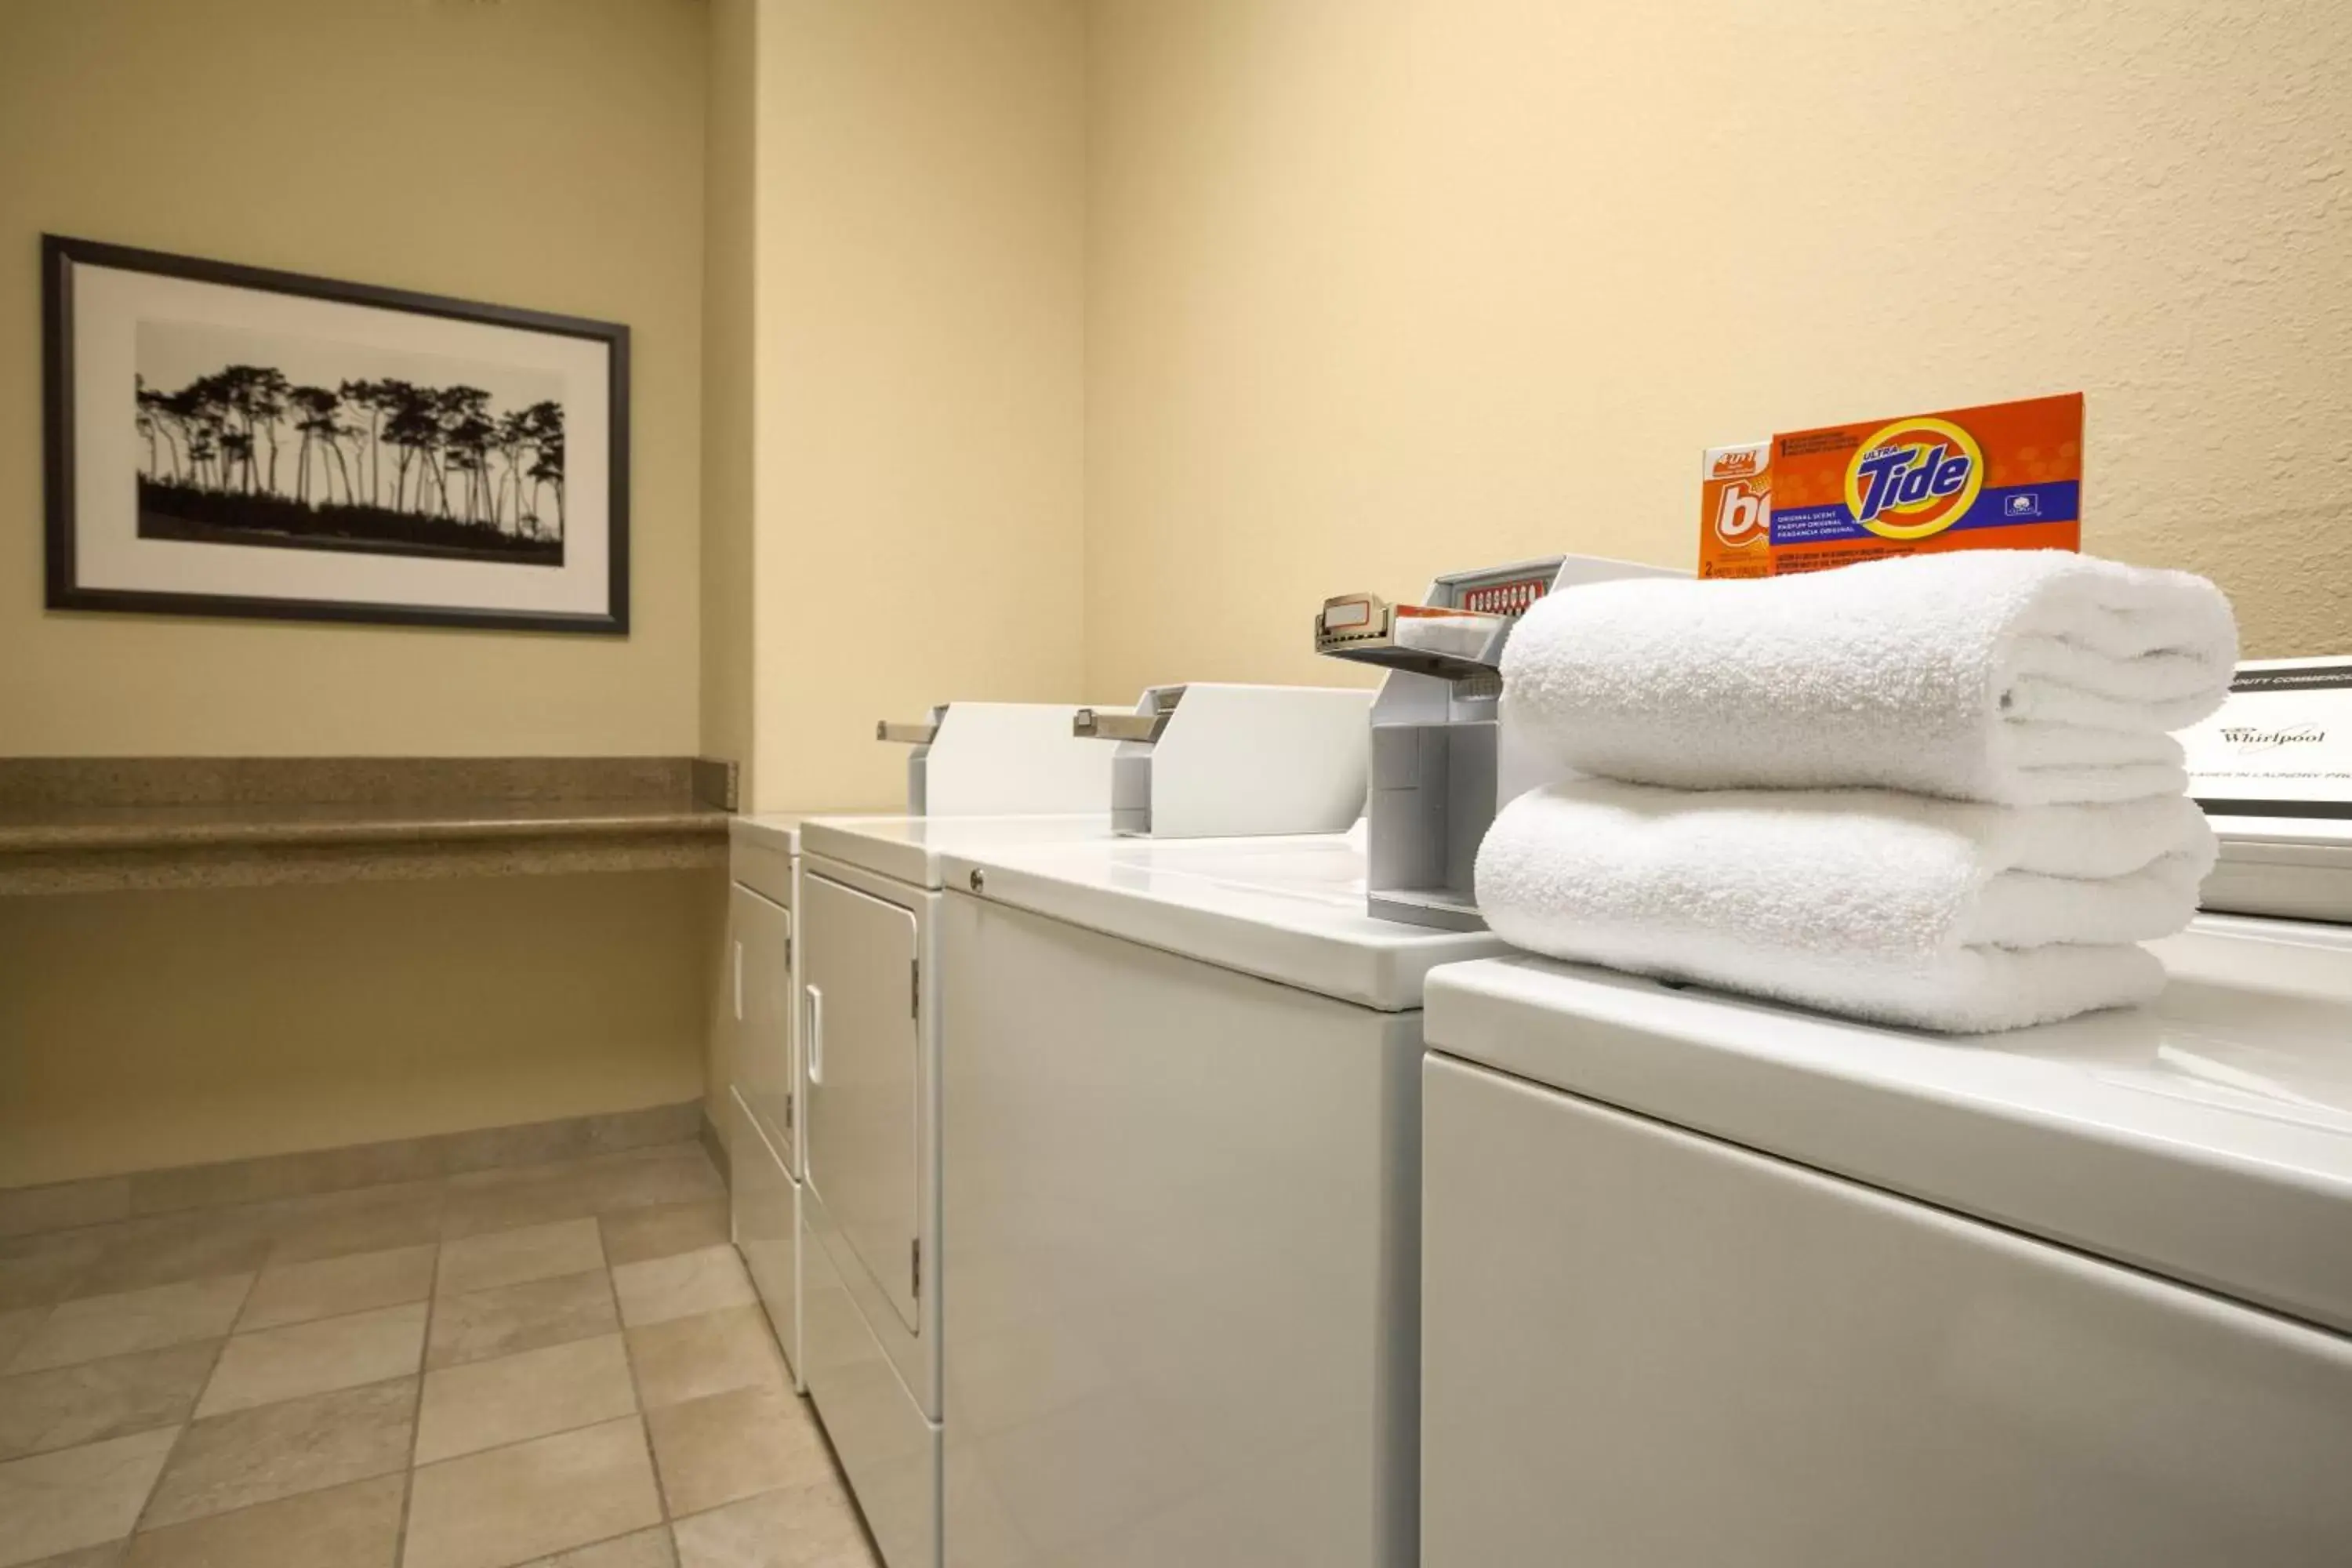 Area and facilities in Country Inn & Suites by Radisson, Enid, OK